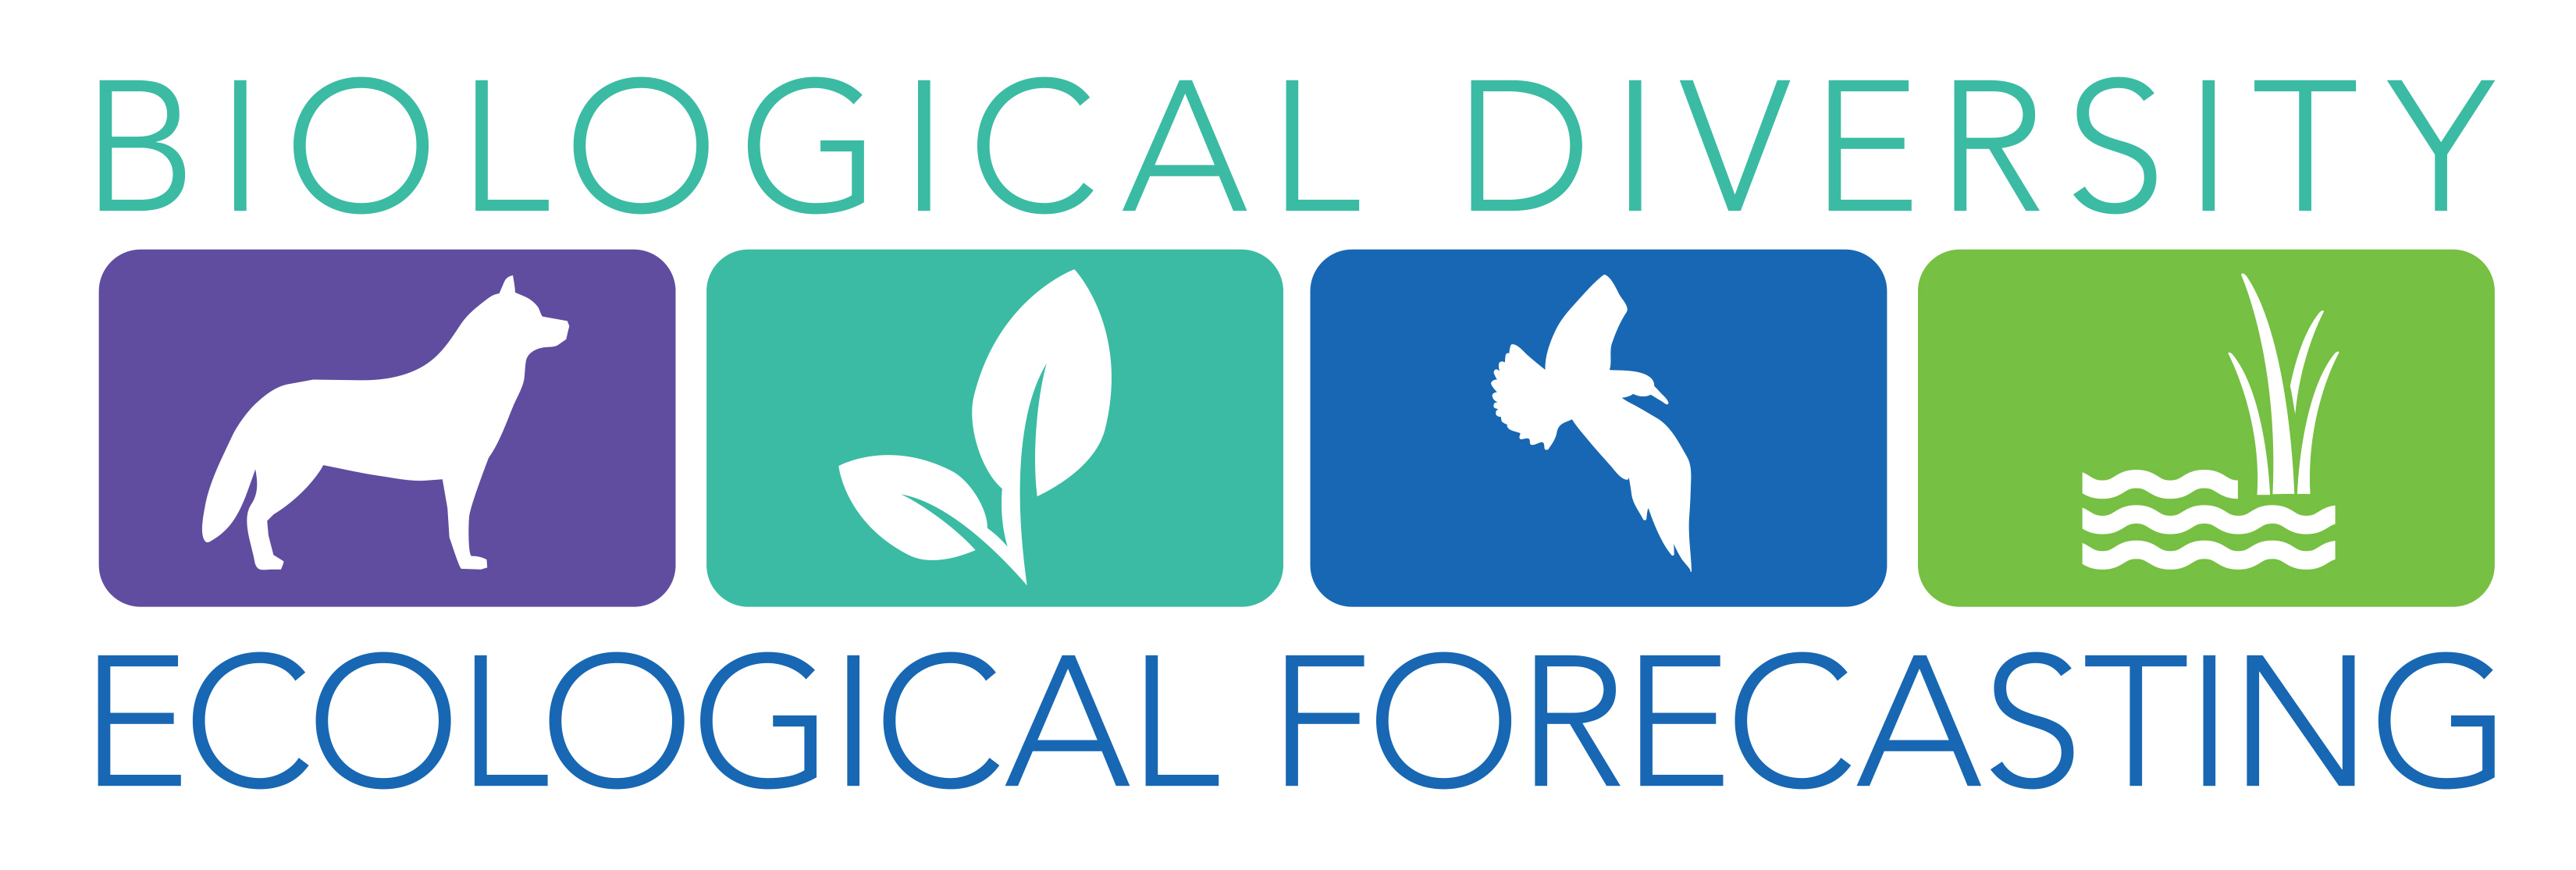 Biological and ecological forecasting logo, contains images of a wolf, a leaf, a bird and aquatic vegetation.